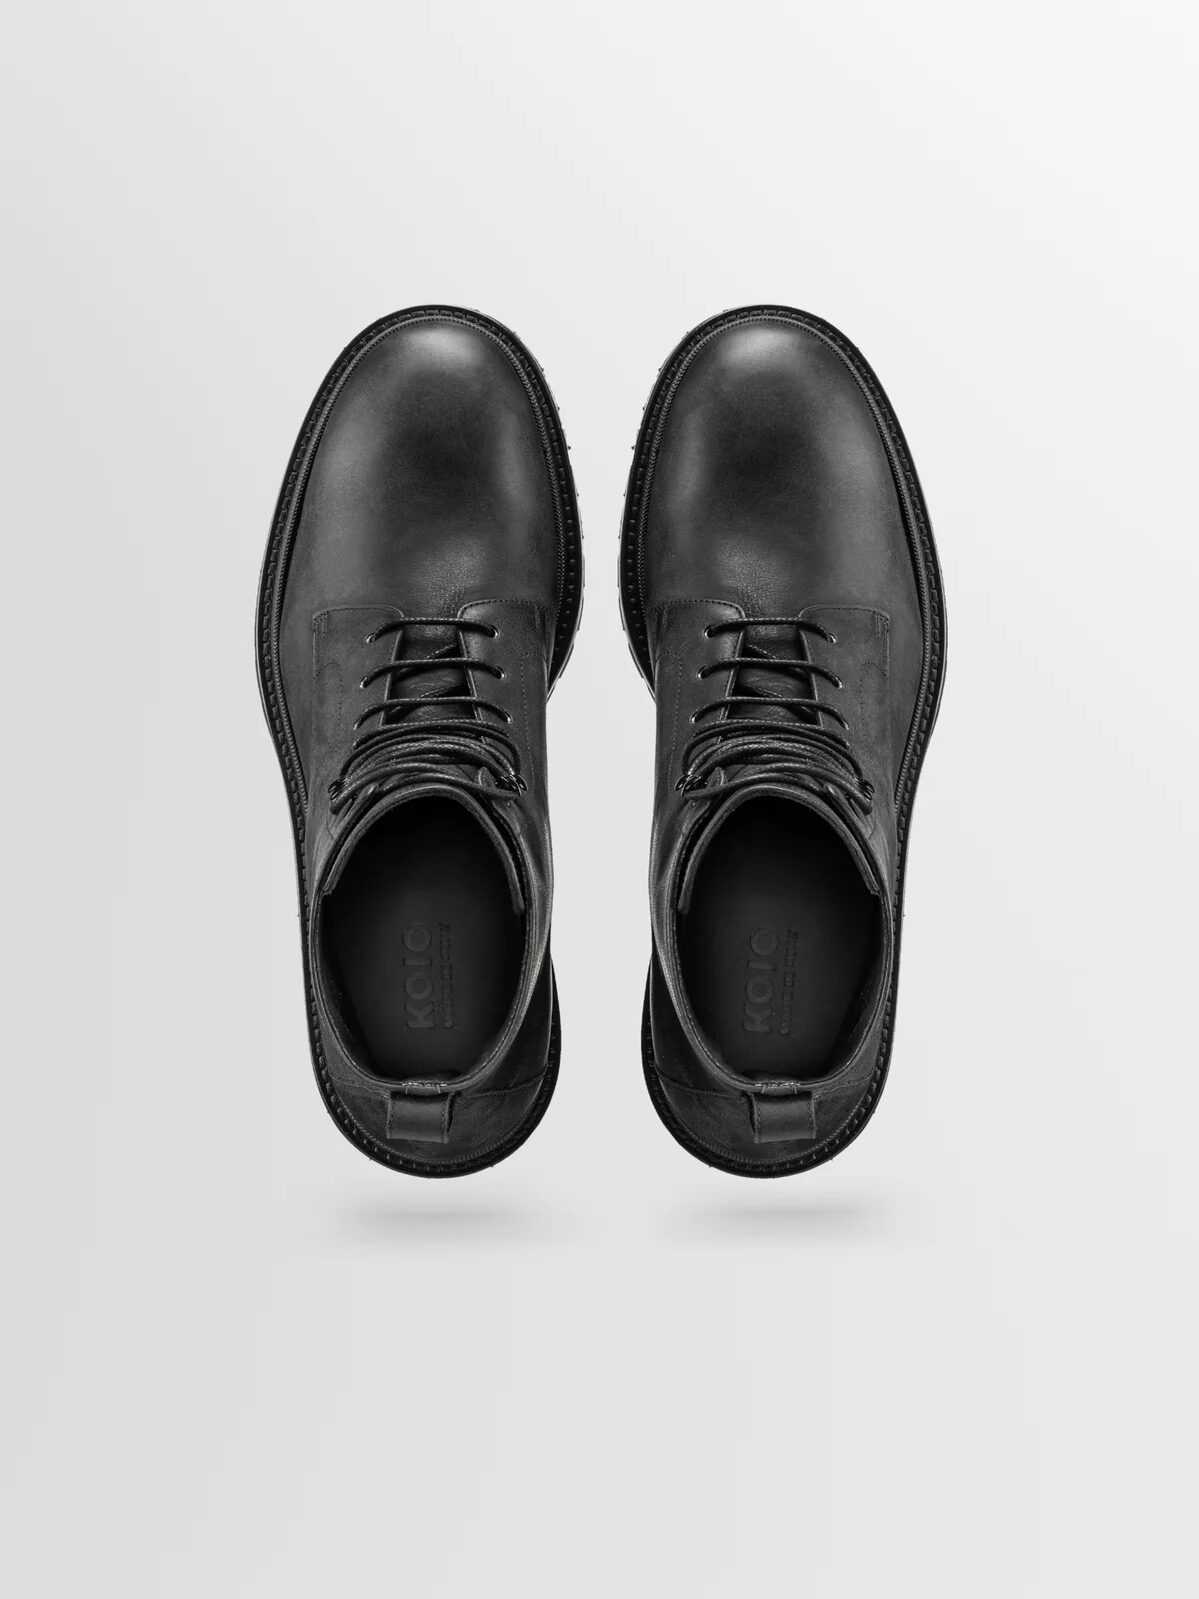 A pair of black Koio boots in front of a light grey background.